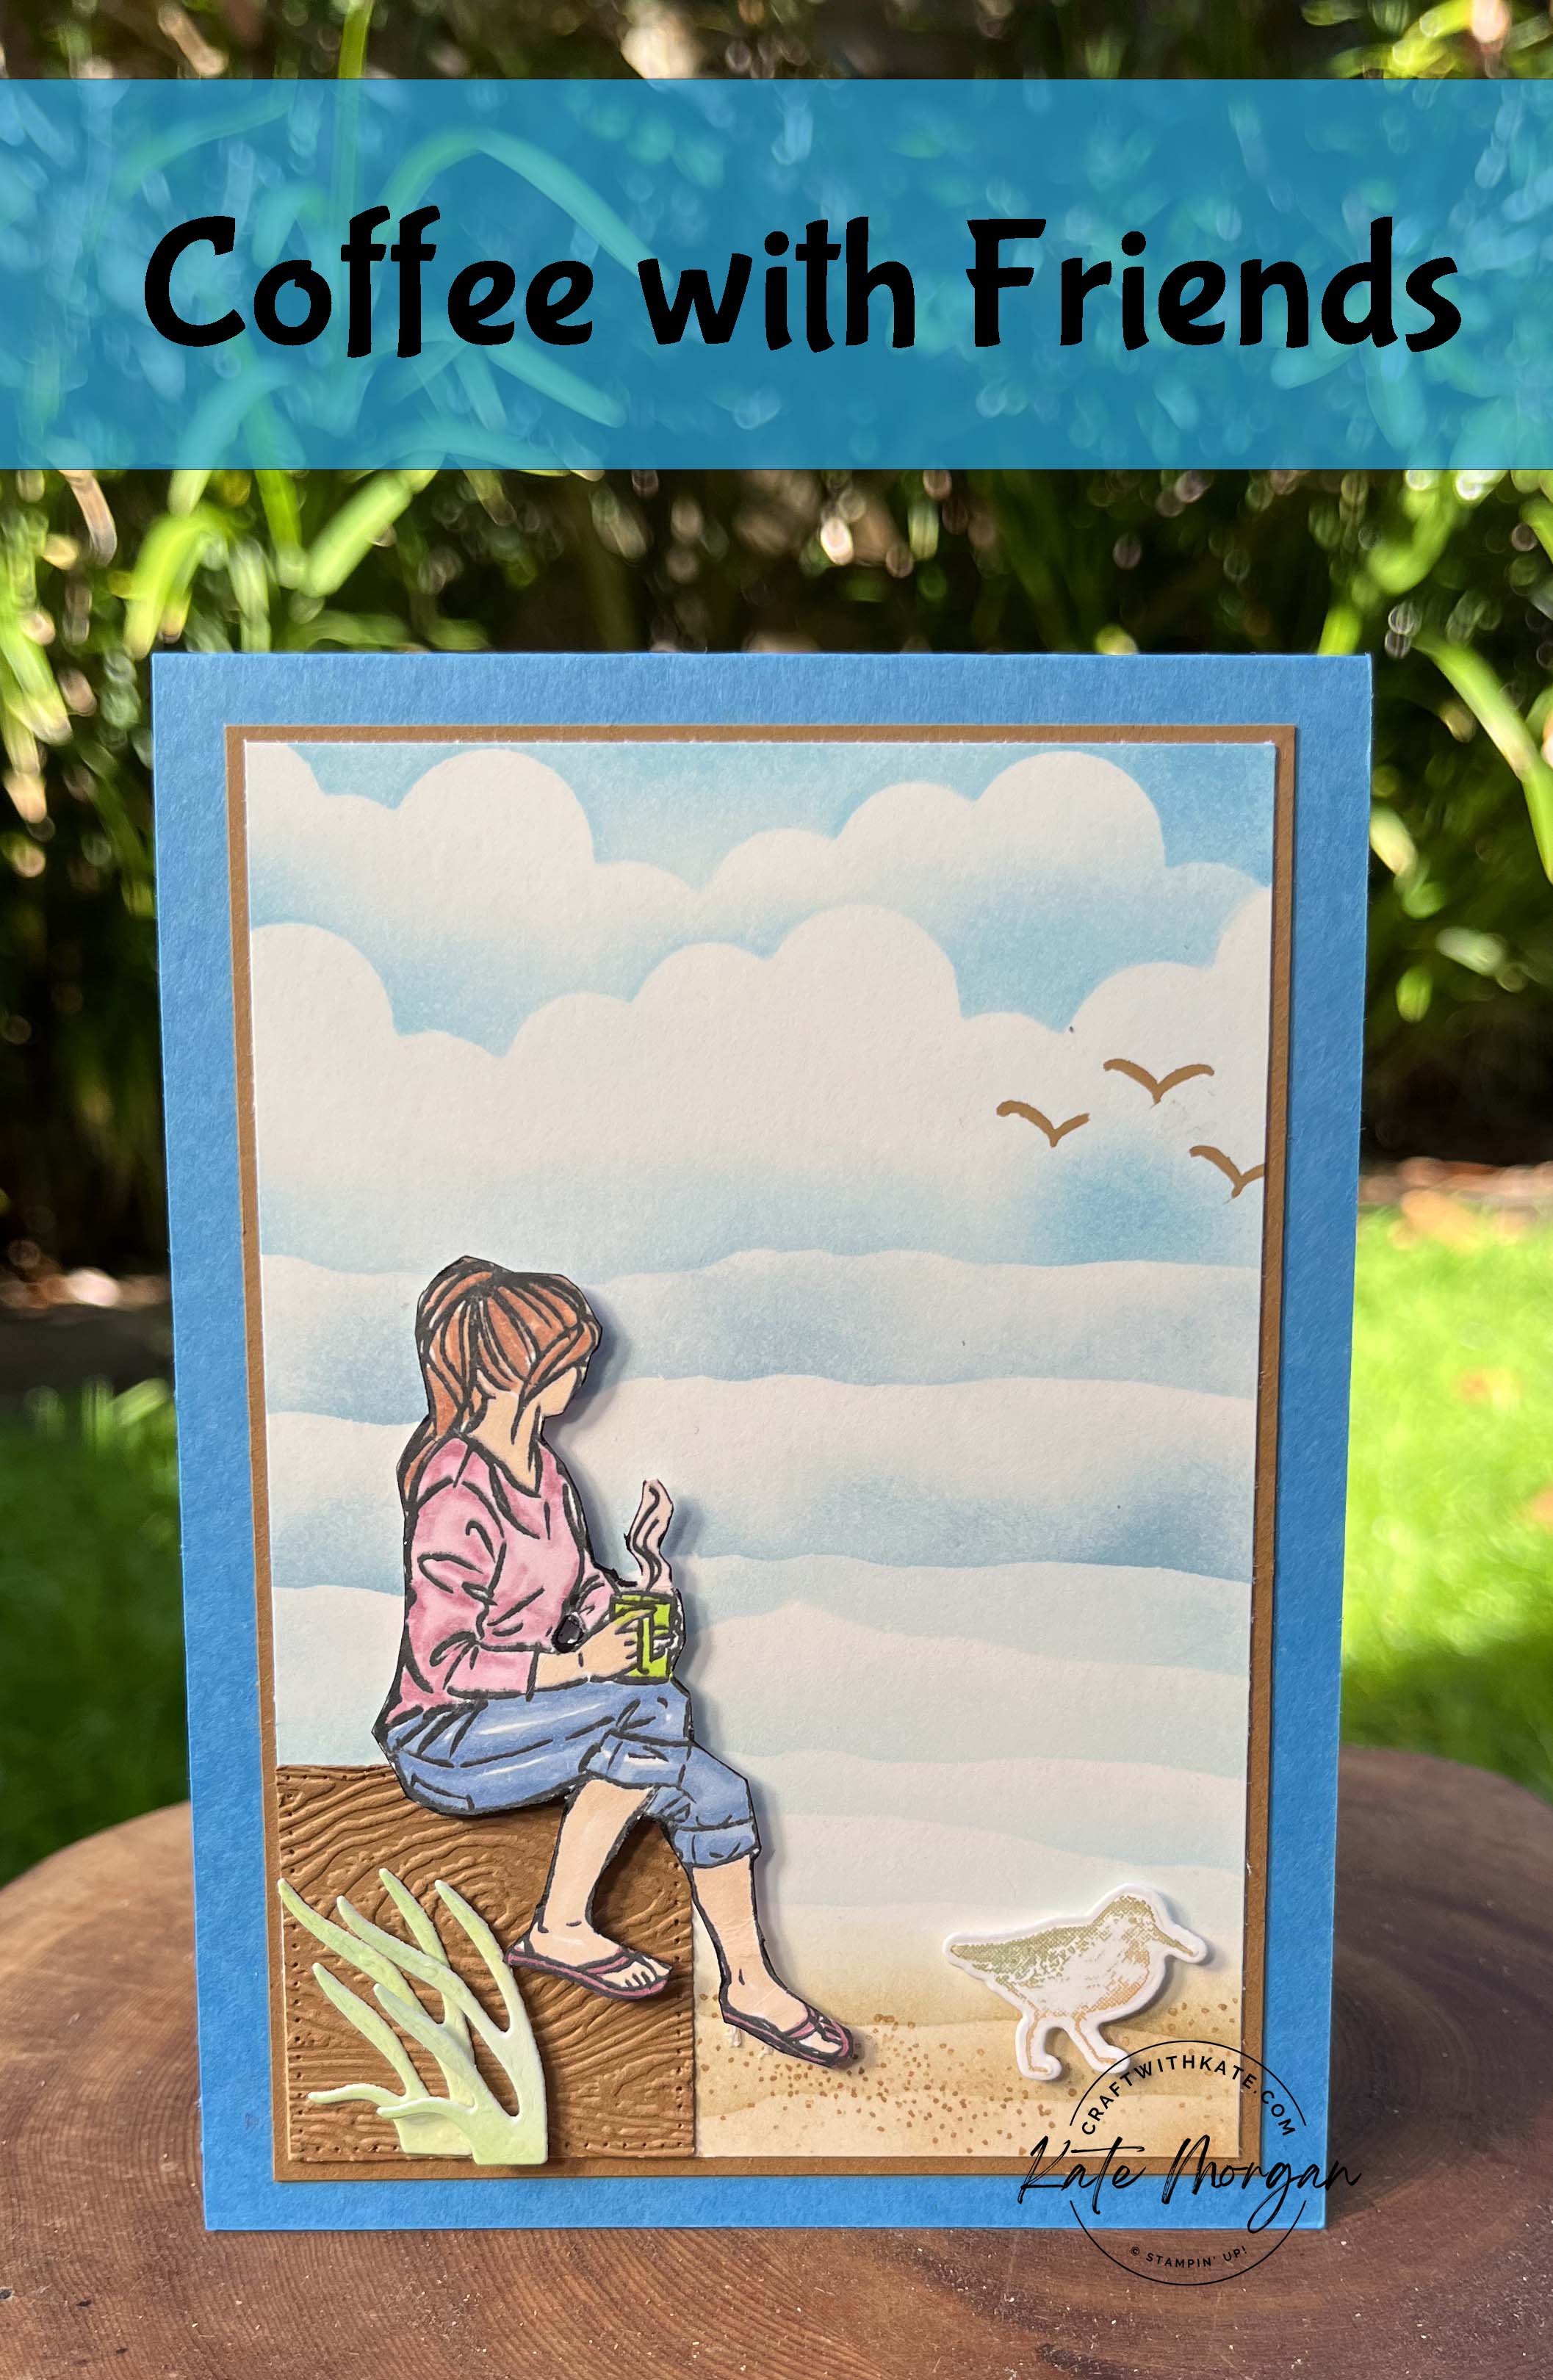 Coffee with Friends Azure Afternoon colour creations blog hop 2023 by Kate Morgan, Stampin Up Australia 2023